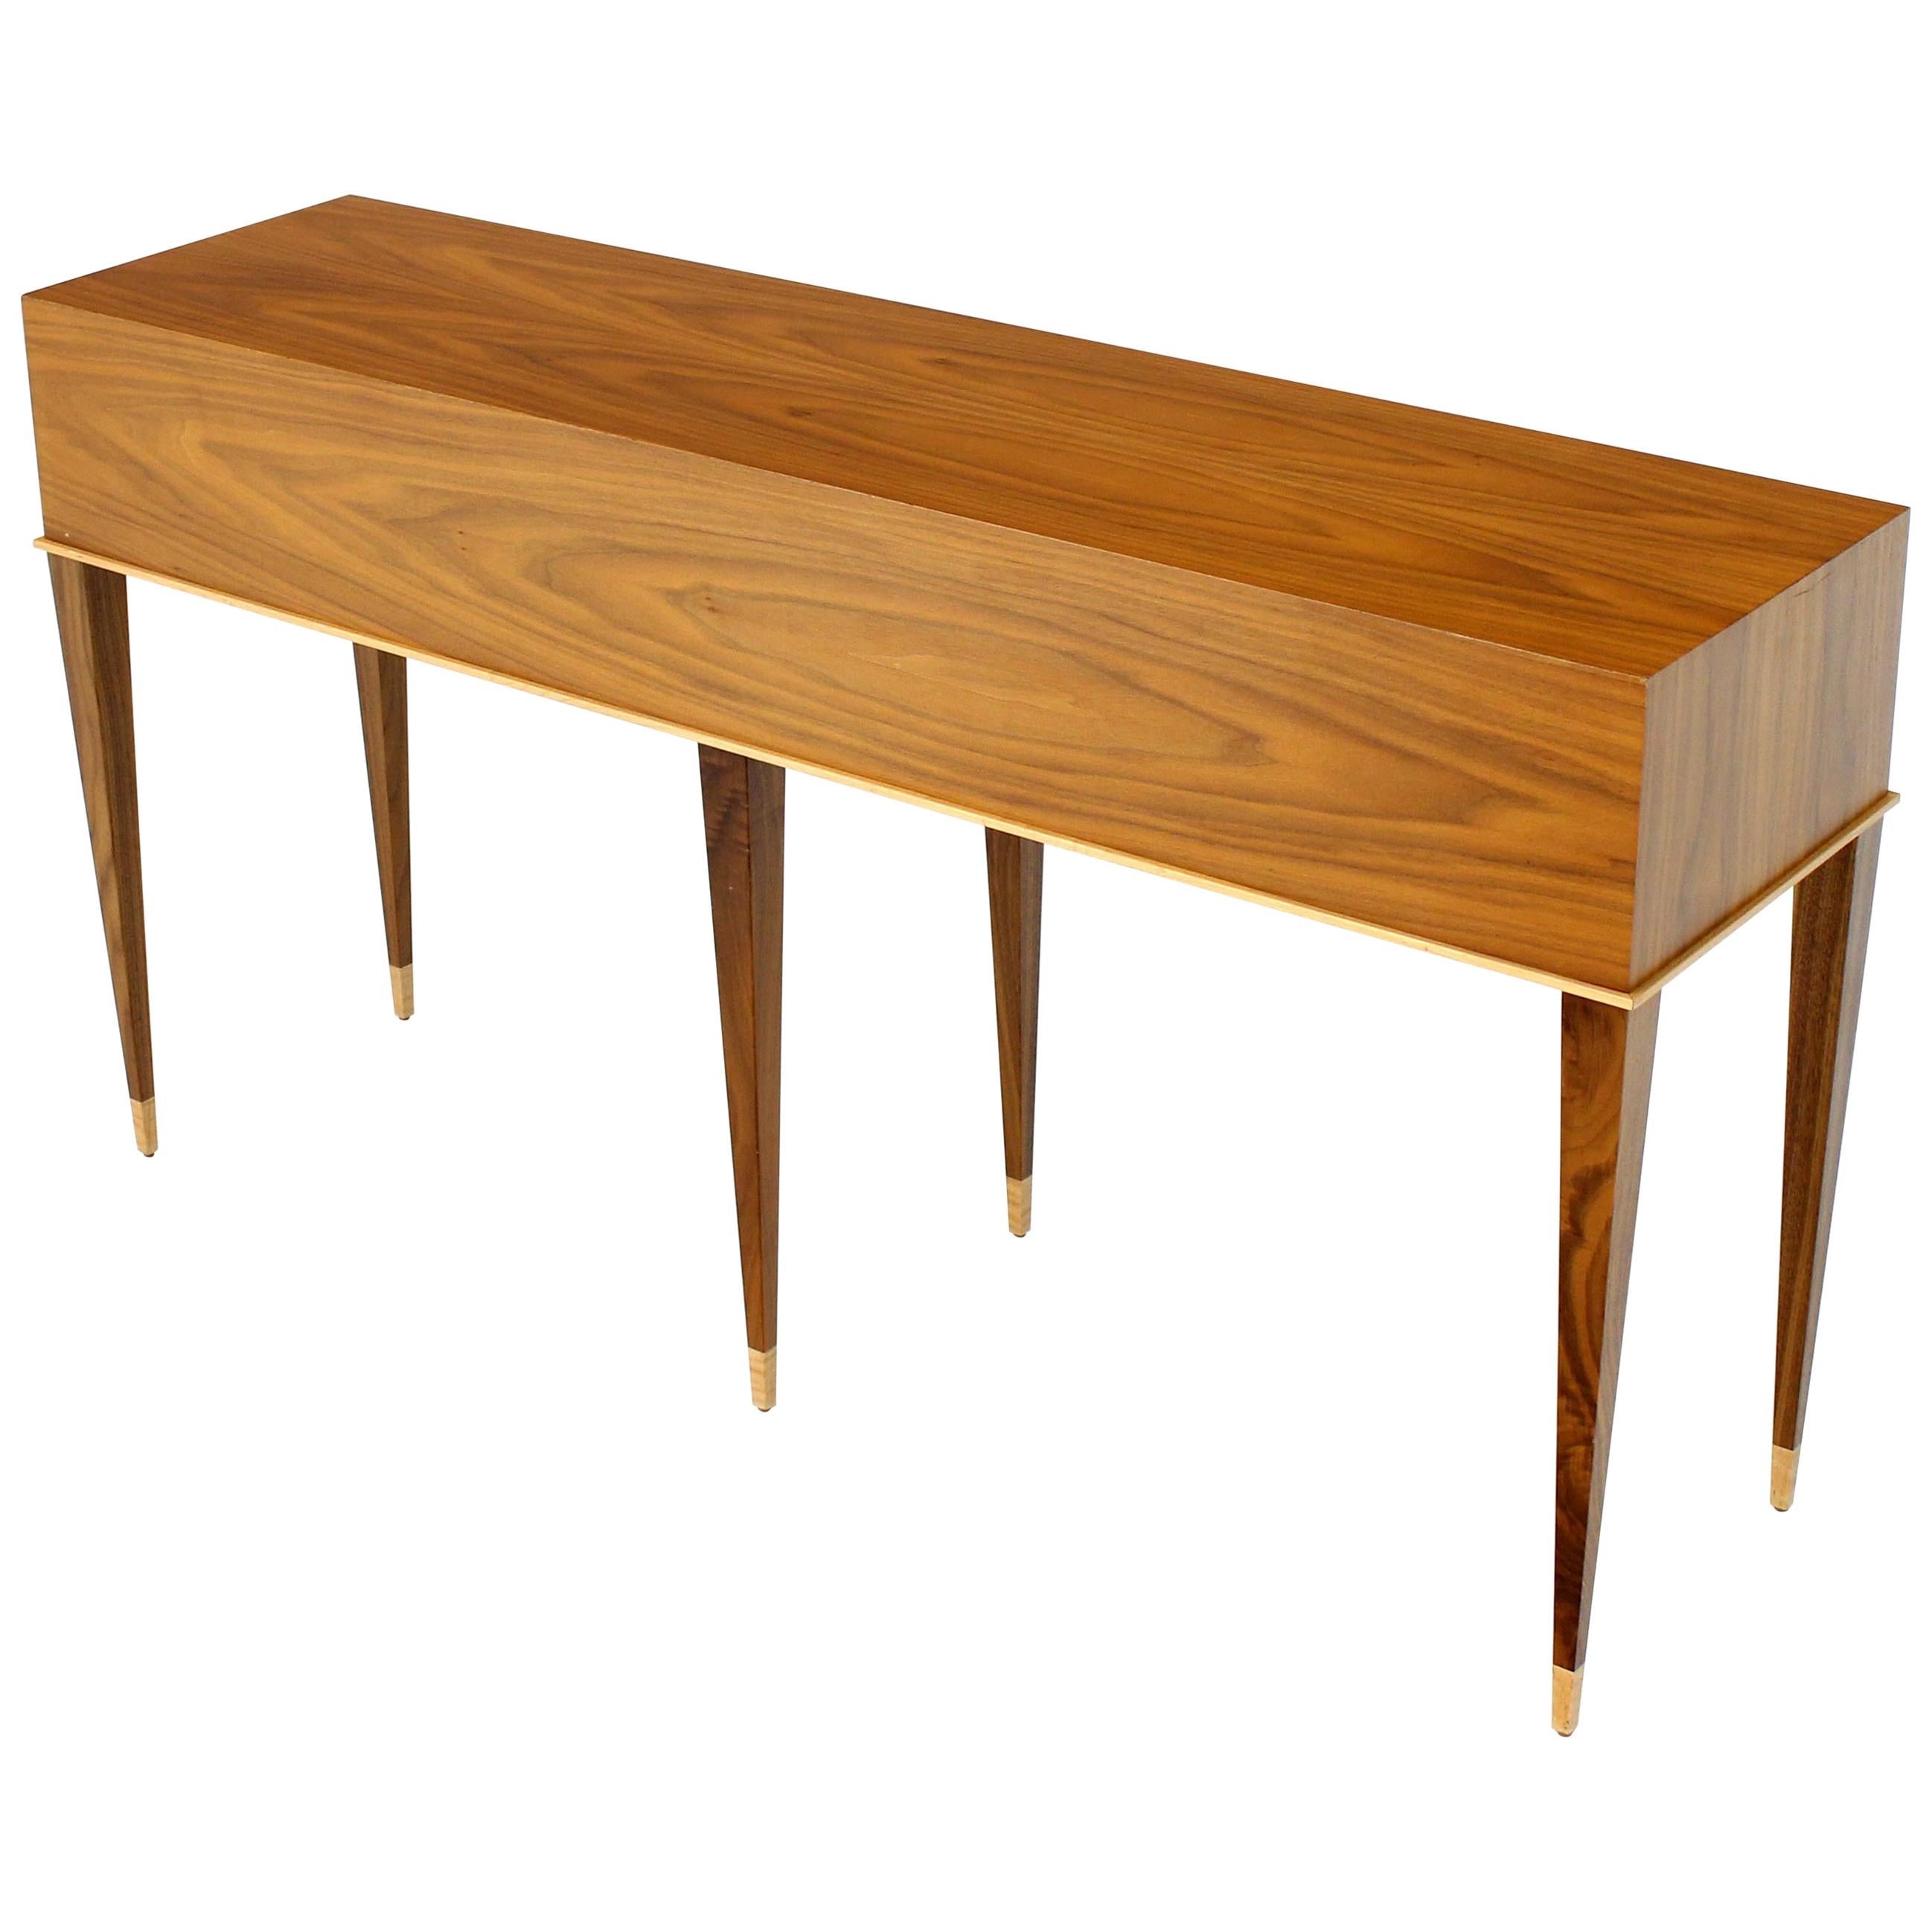 Walnut Six-Legged Console Table on Tapered Legs Parzinger Style